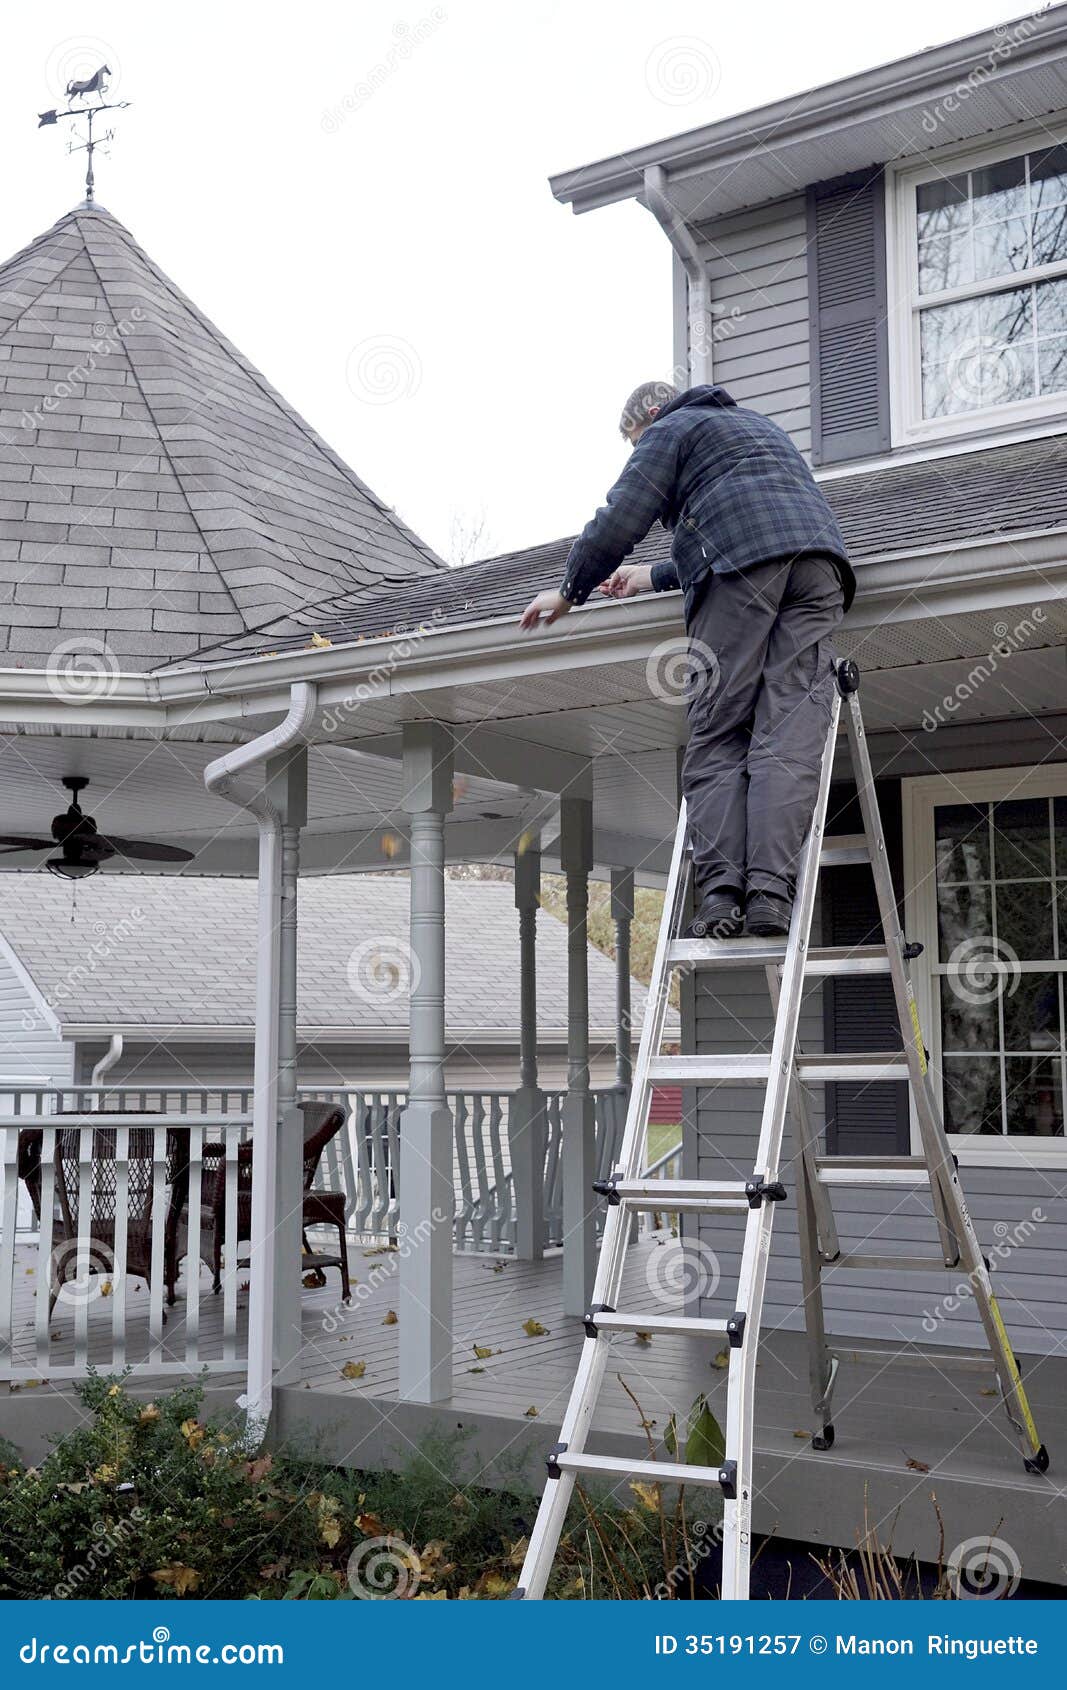 man cleaning eaves troughs